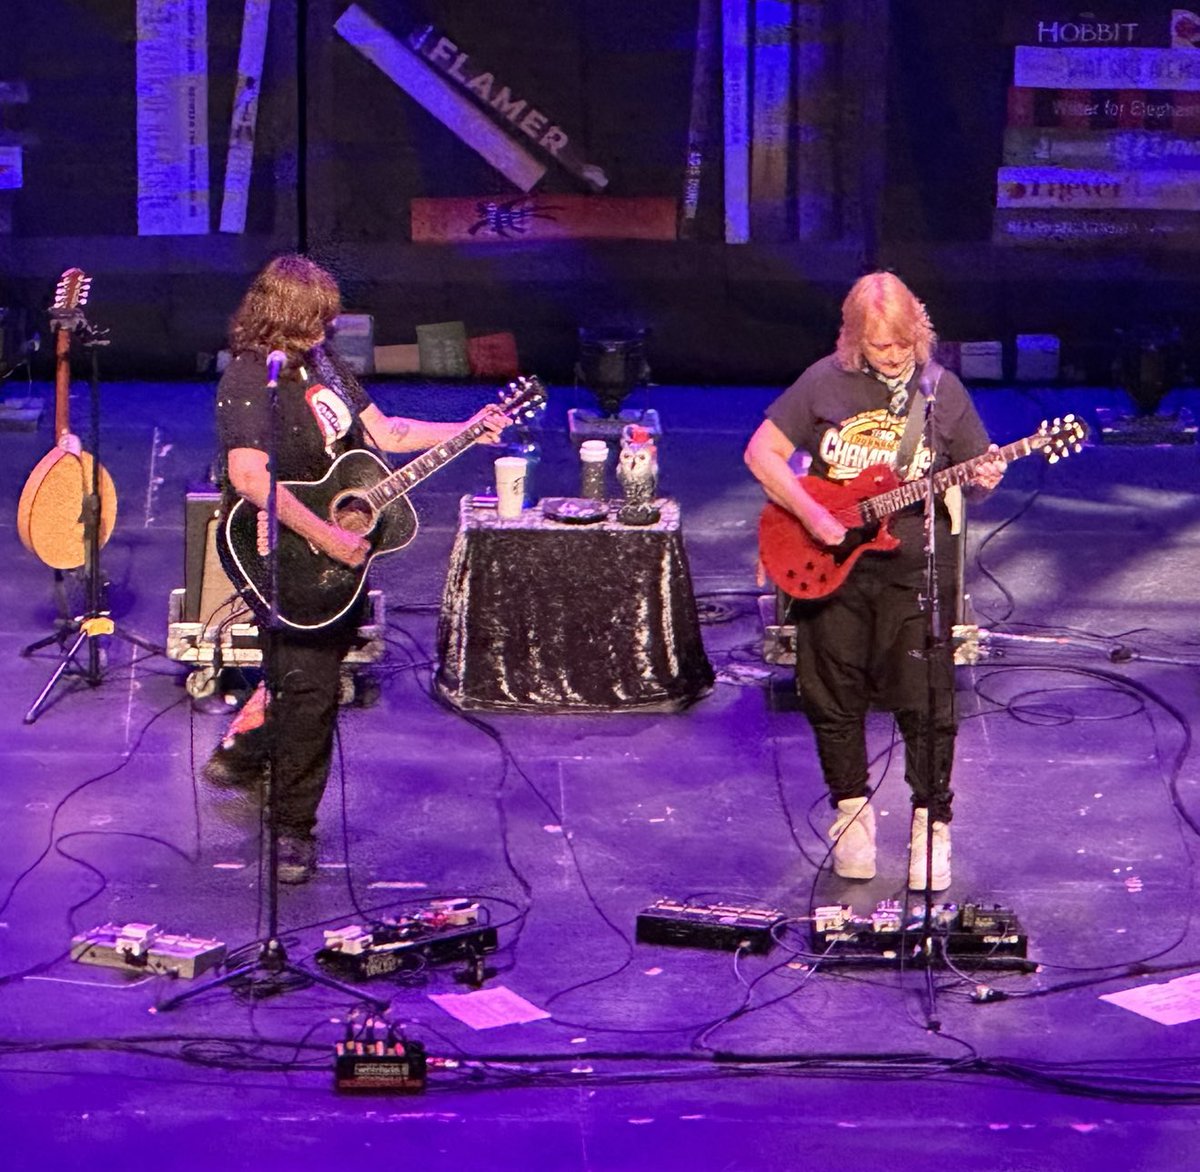 “The hardest to learn is the least complicated” Great to hear ⁦@Indigo_Girls⁩ ⁦@englert⁩ tonight in Iowa City! Their music was part of the soundtrack that got me through my grad school and postdoc days! 🎶